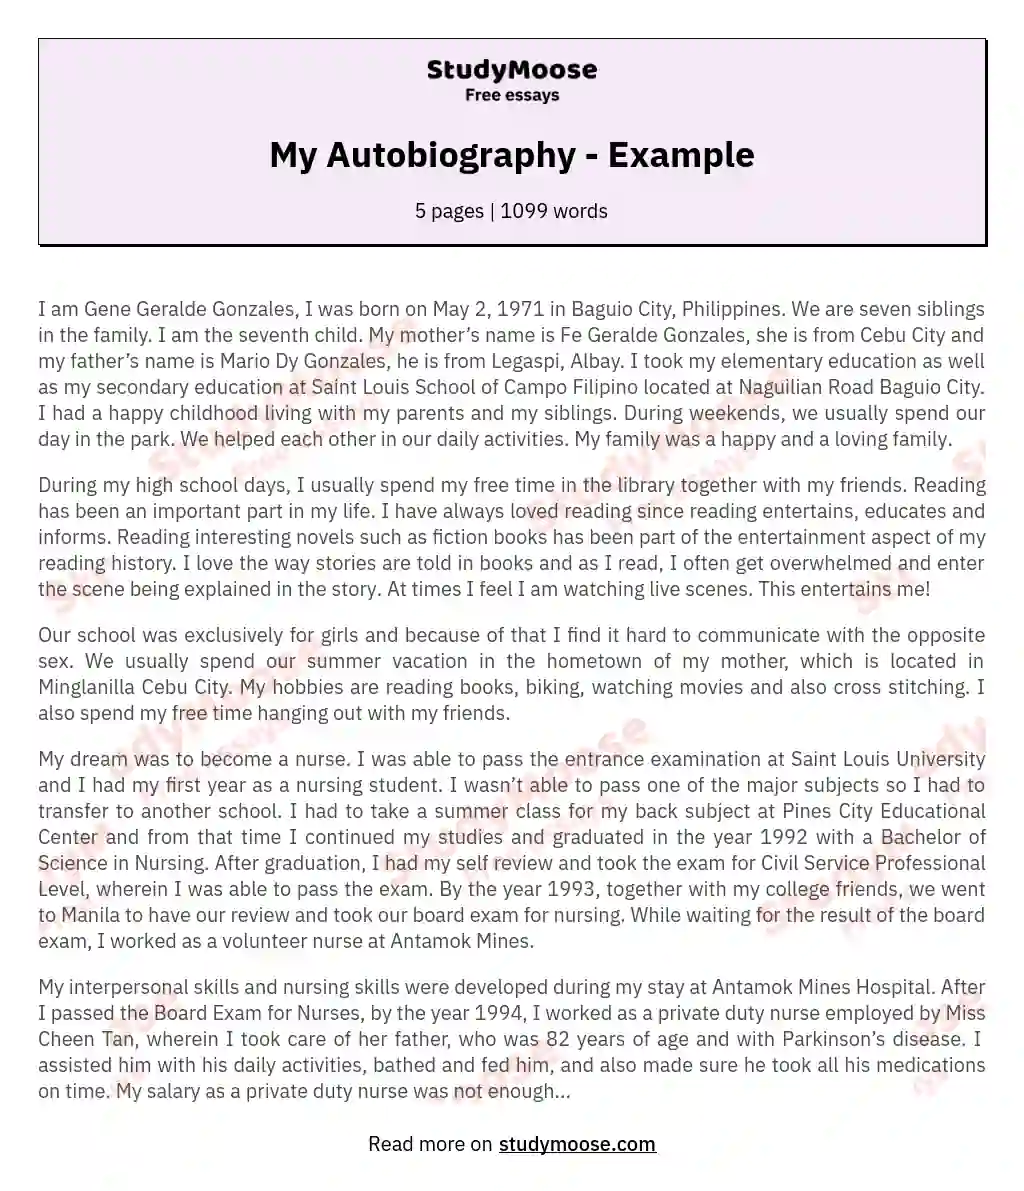 My Autobiography - Example Free Essay Example